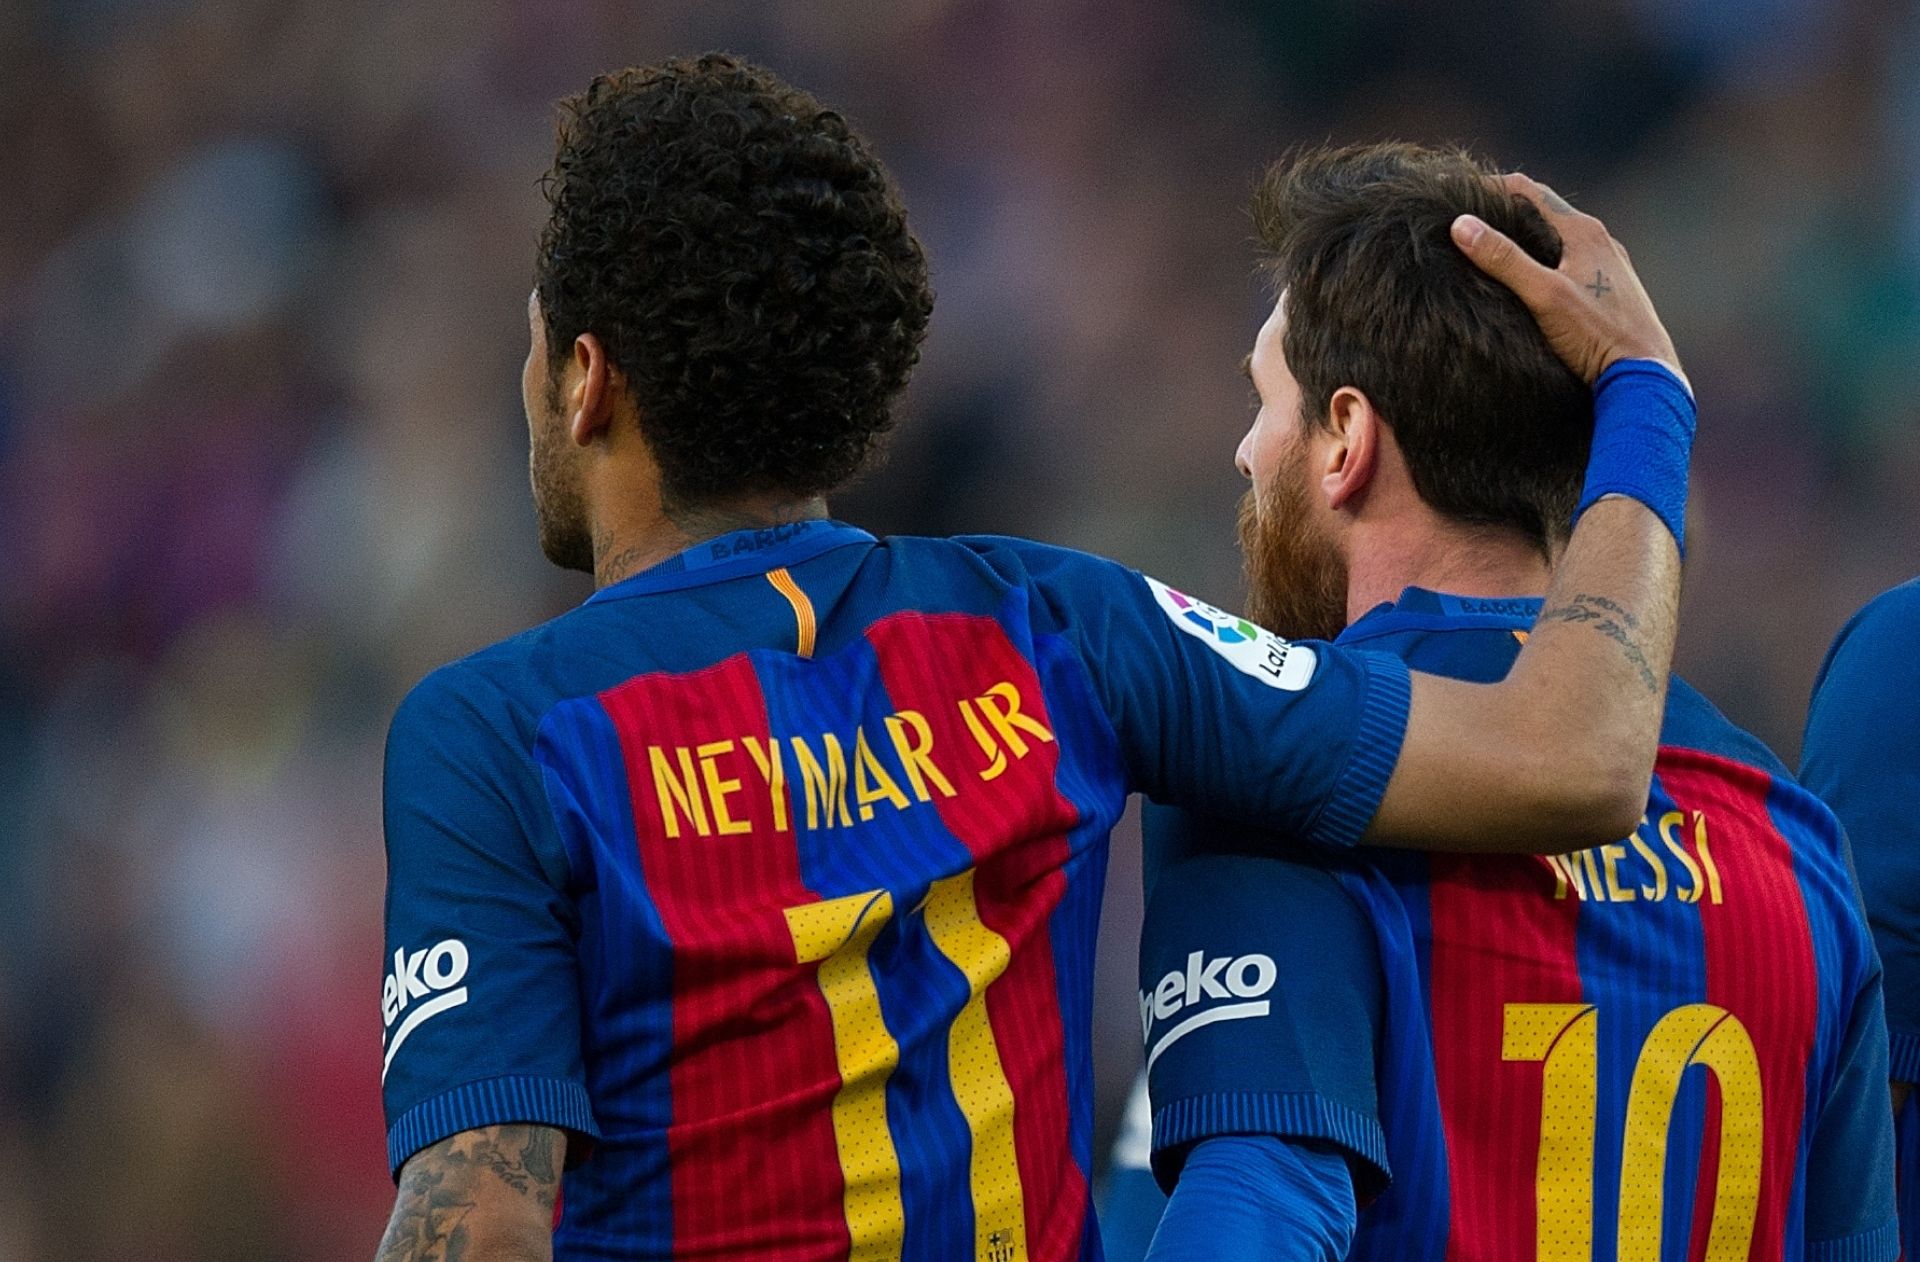 Messi responds to talks of possible reunion with Neymar at Barcelona